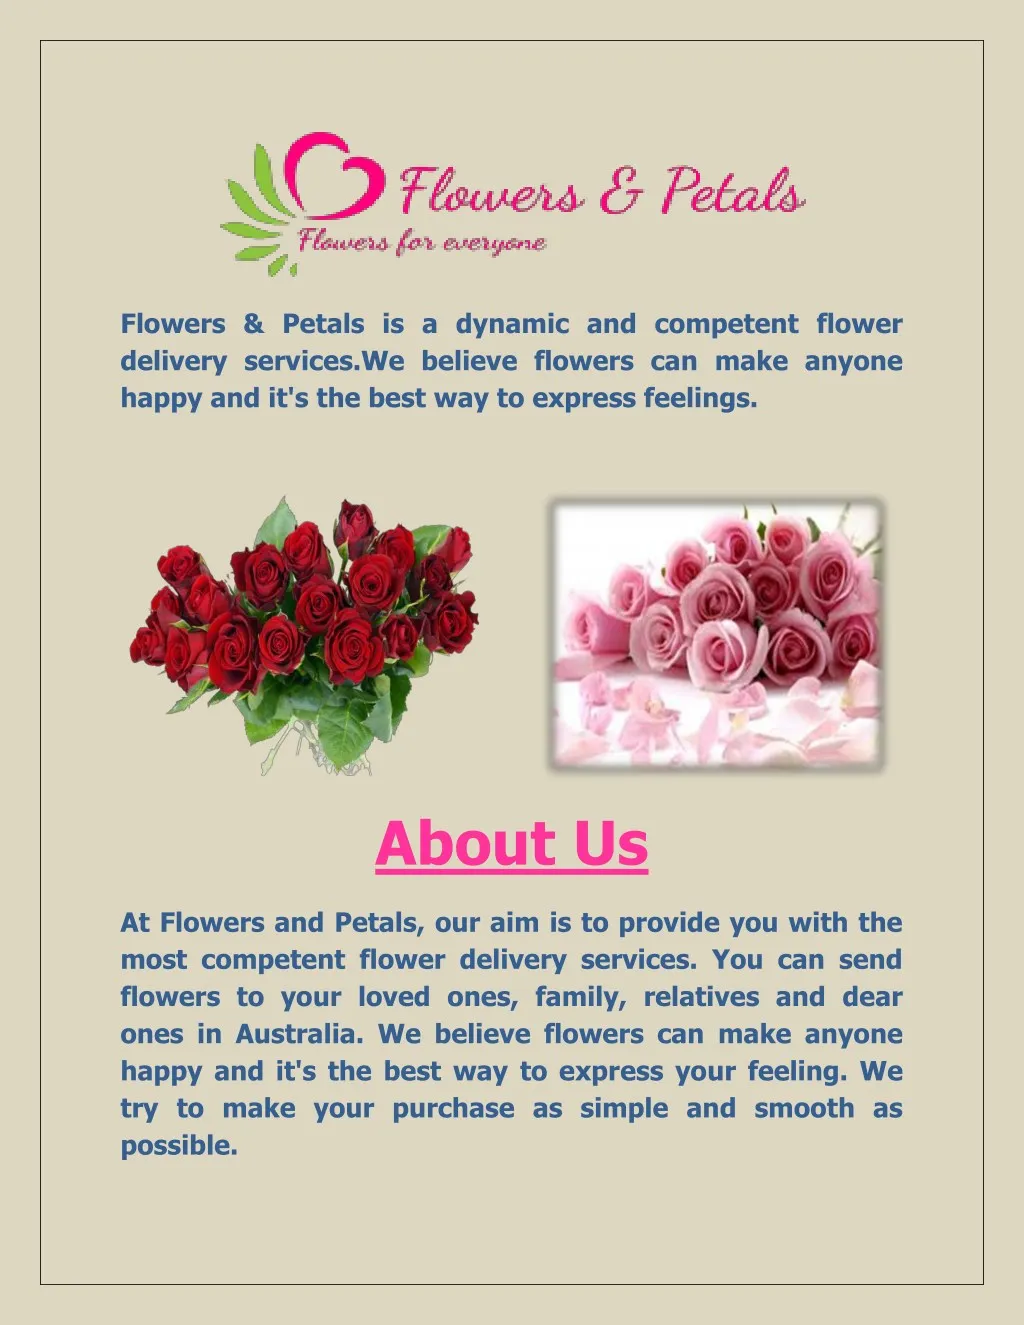 flowers petals is a dynamic and competent flower